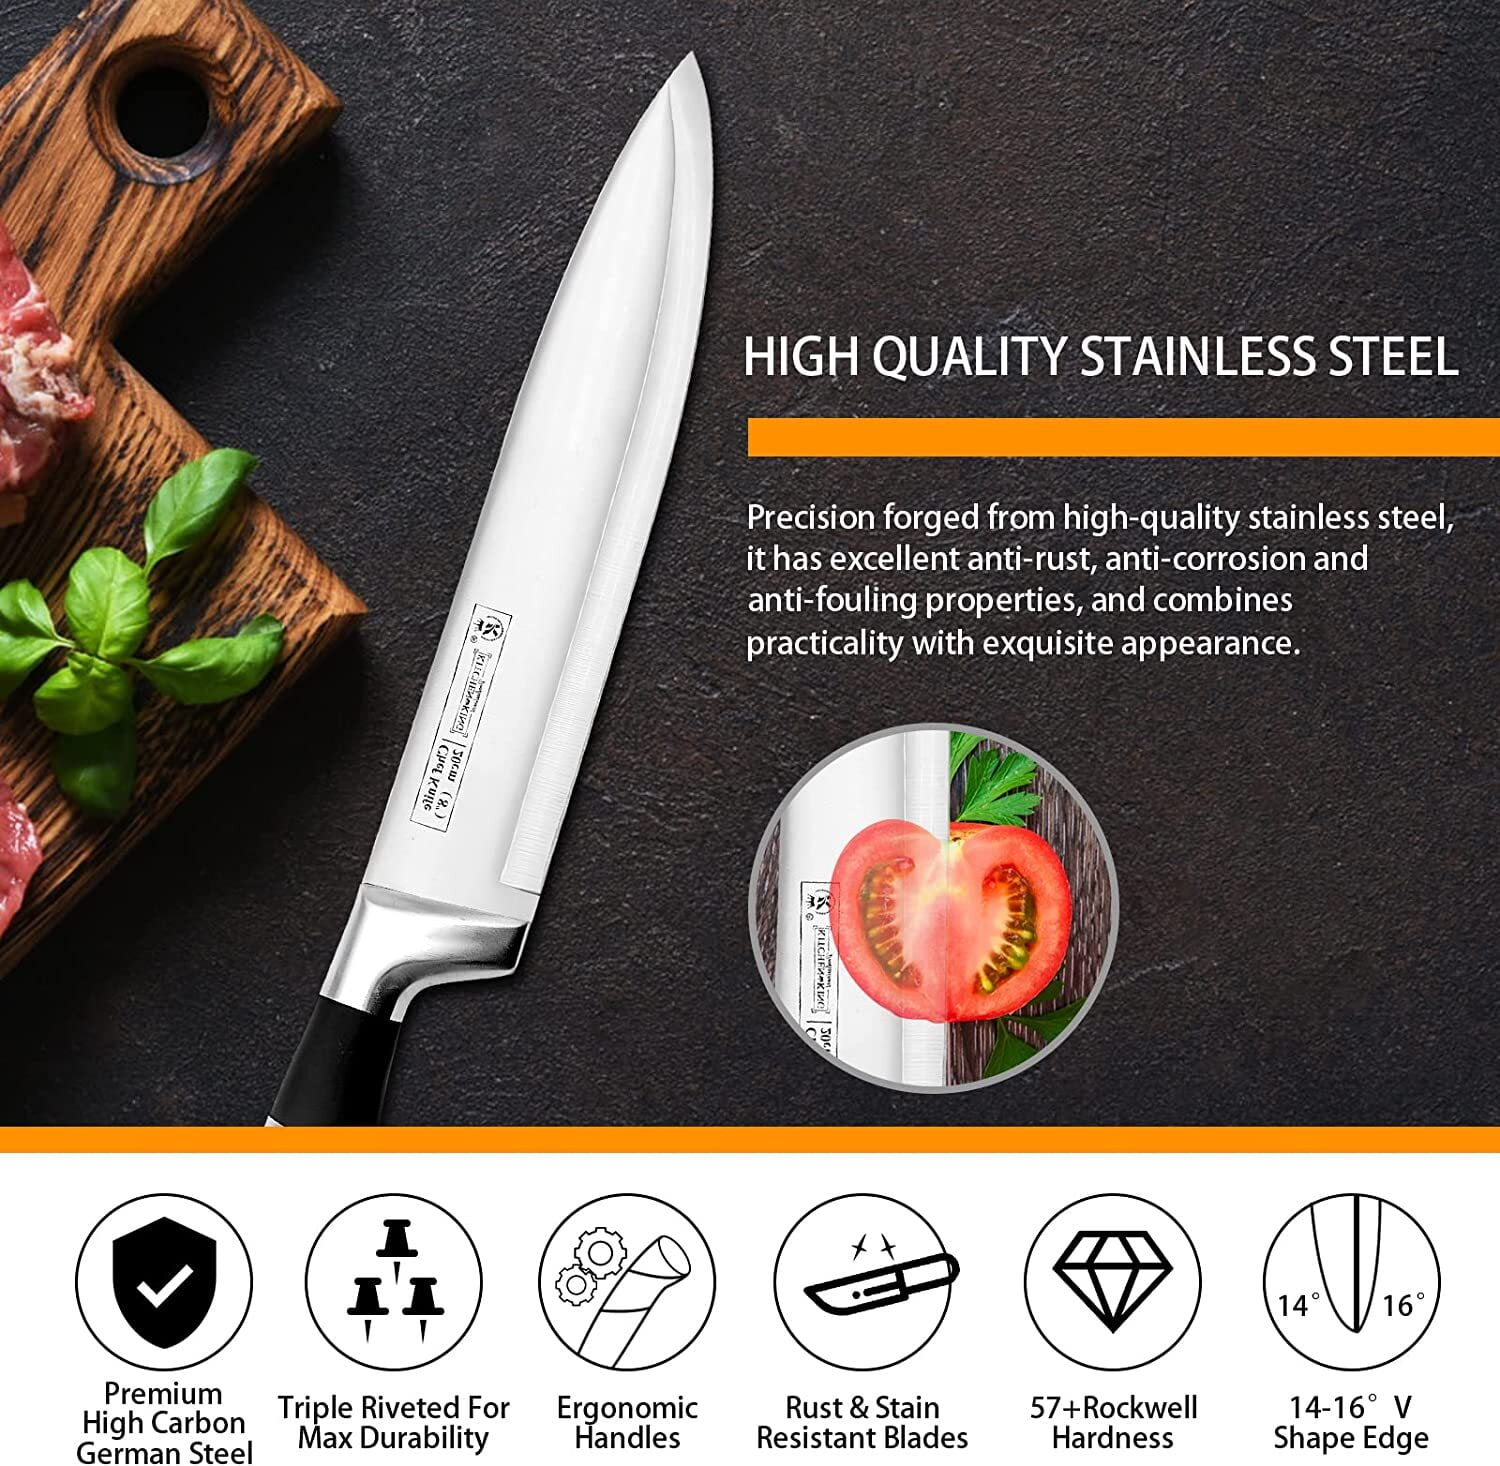 Kitchen Knife Set, YF-TOW 9pcs Stainless Steel Knife Sets for Kitchen with Block, Sharp, Non-Slip, Gradient Colour, Chef Knife, Peel Cutter, Etc